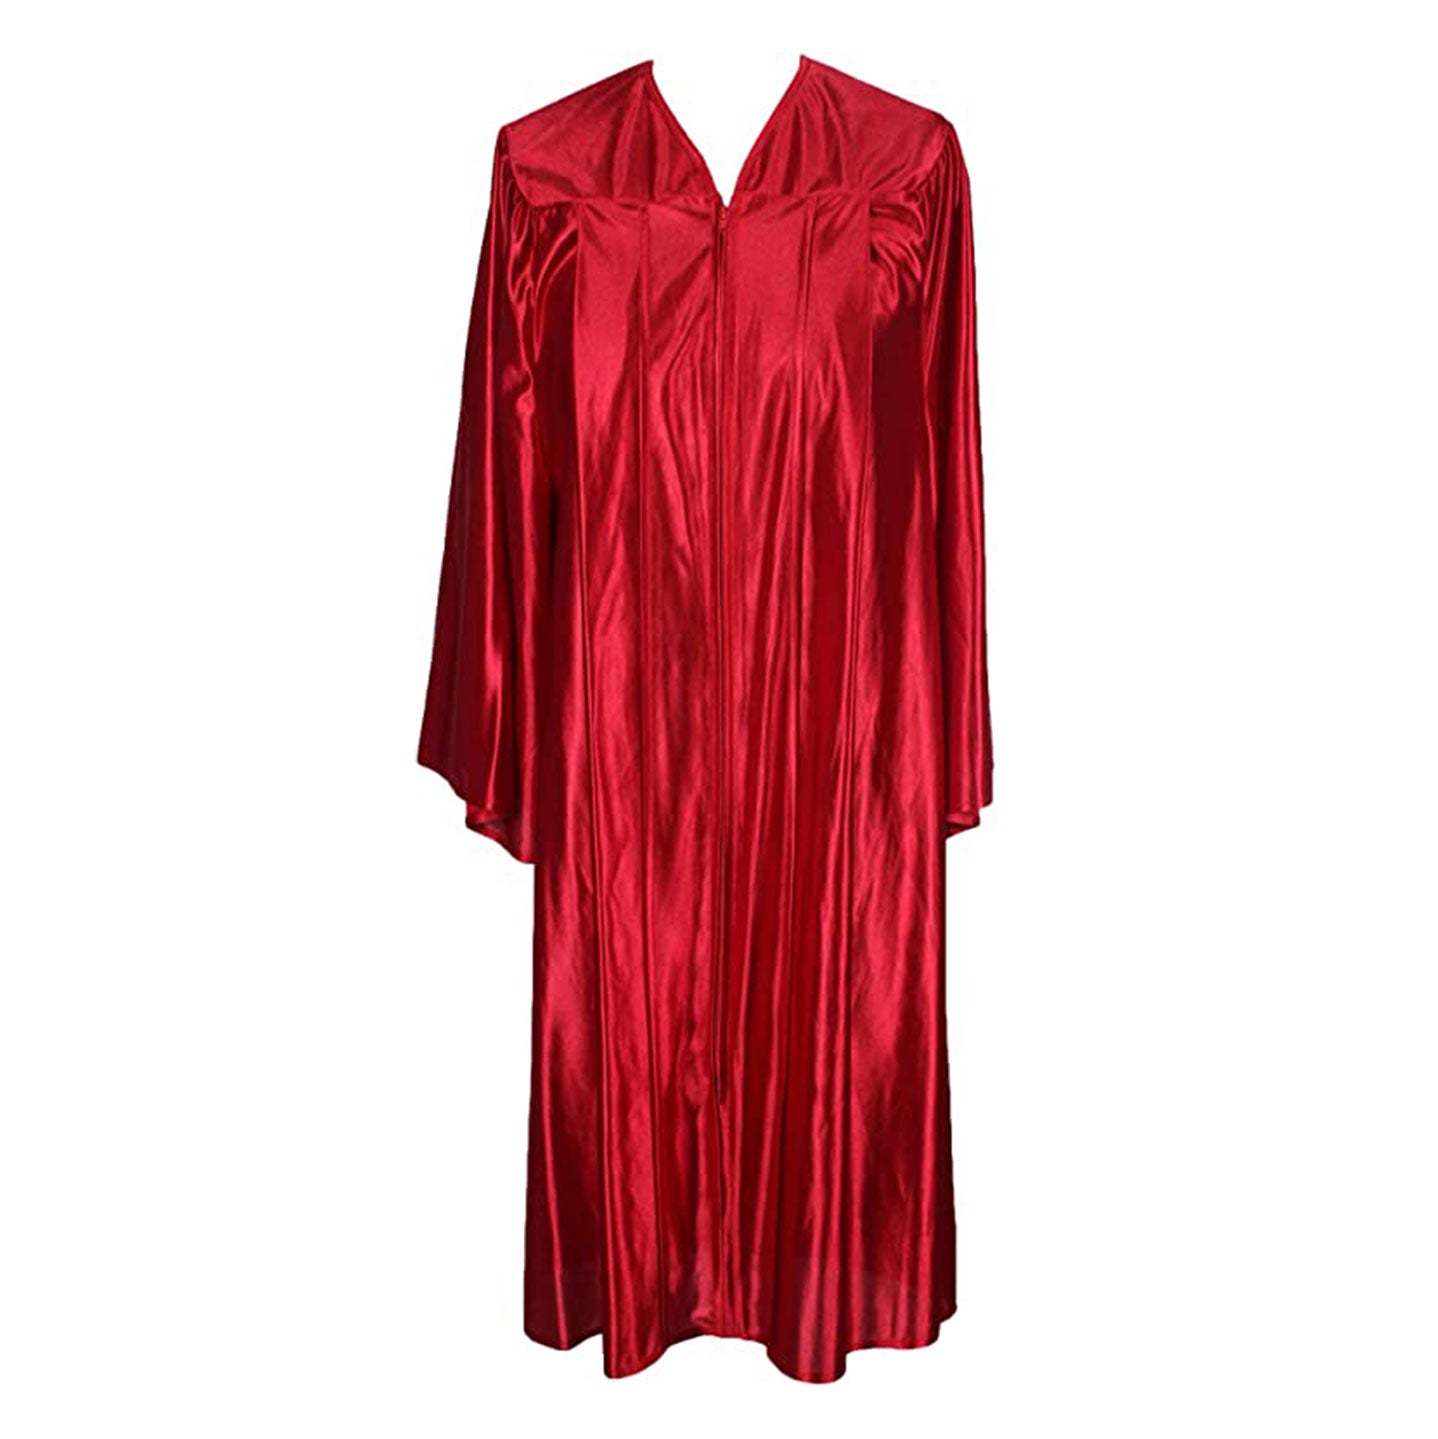 Kinder Shiny Red Gown